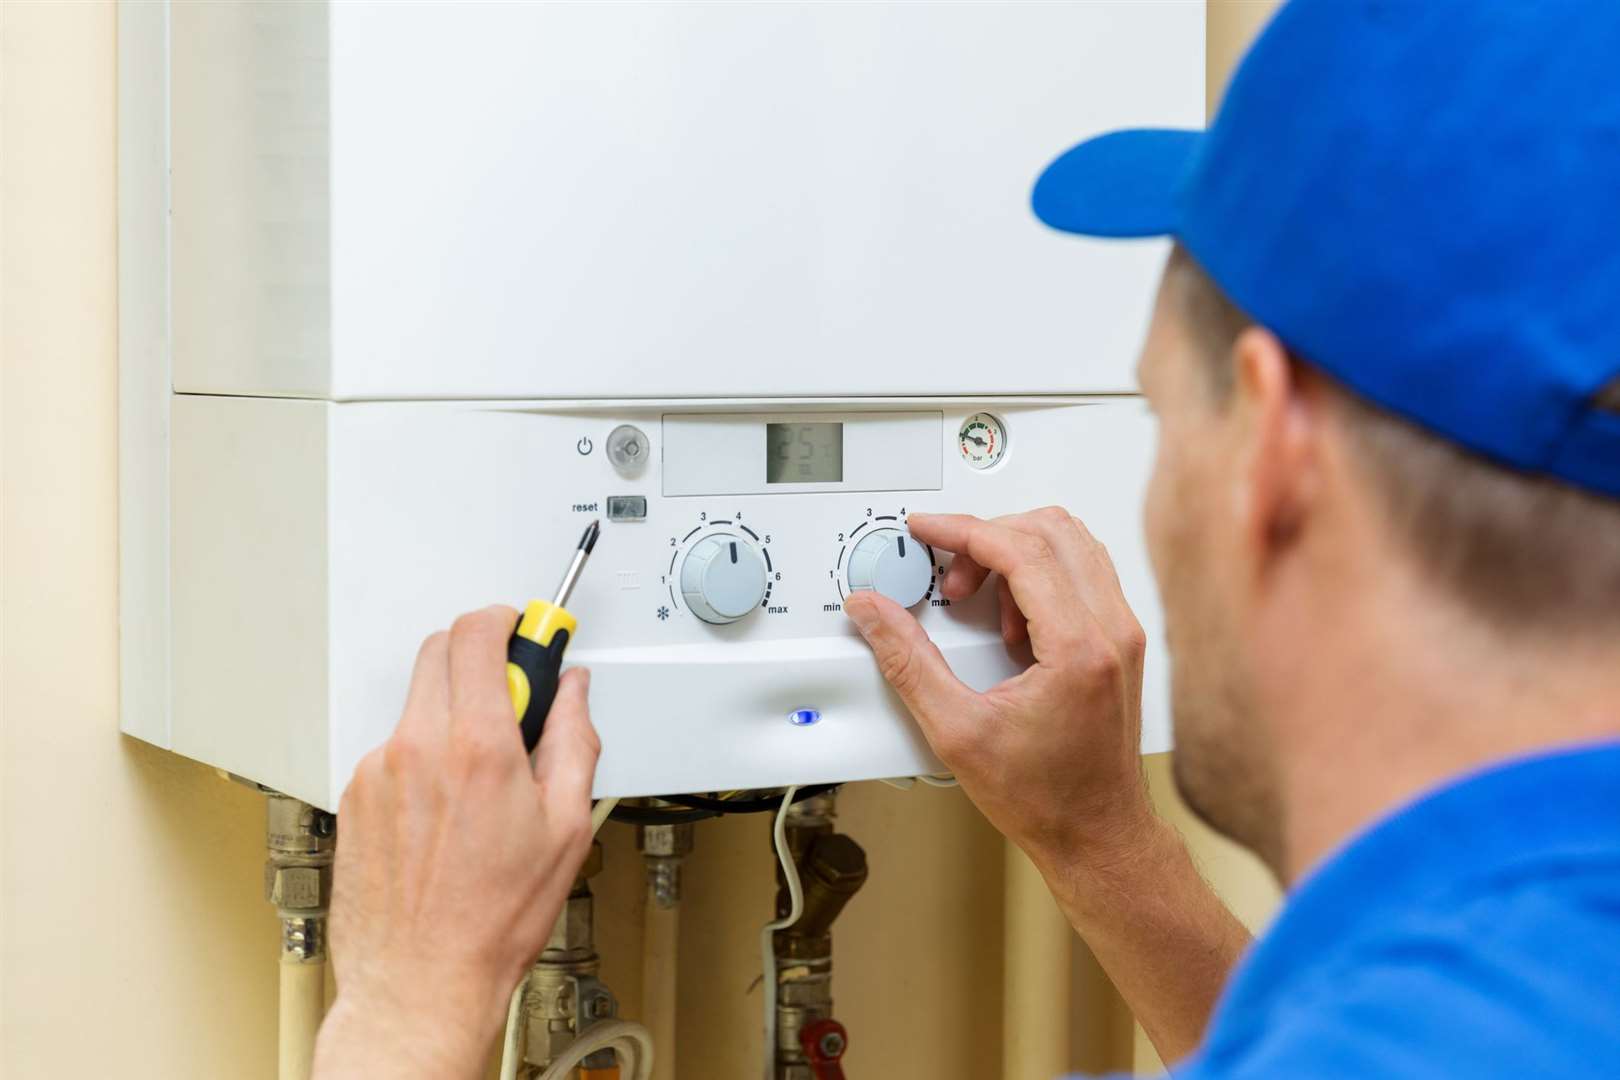 Before we enter the coldest winter months it is worth having your boiler and heating serviced to ensure it's running safely and efficiently